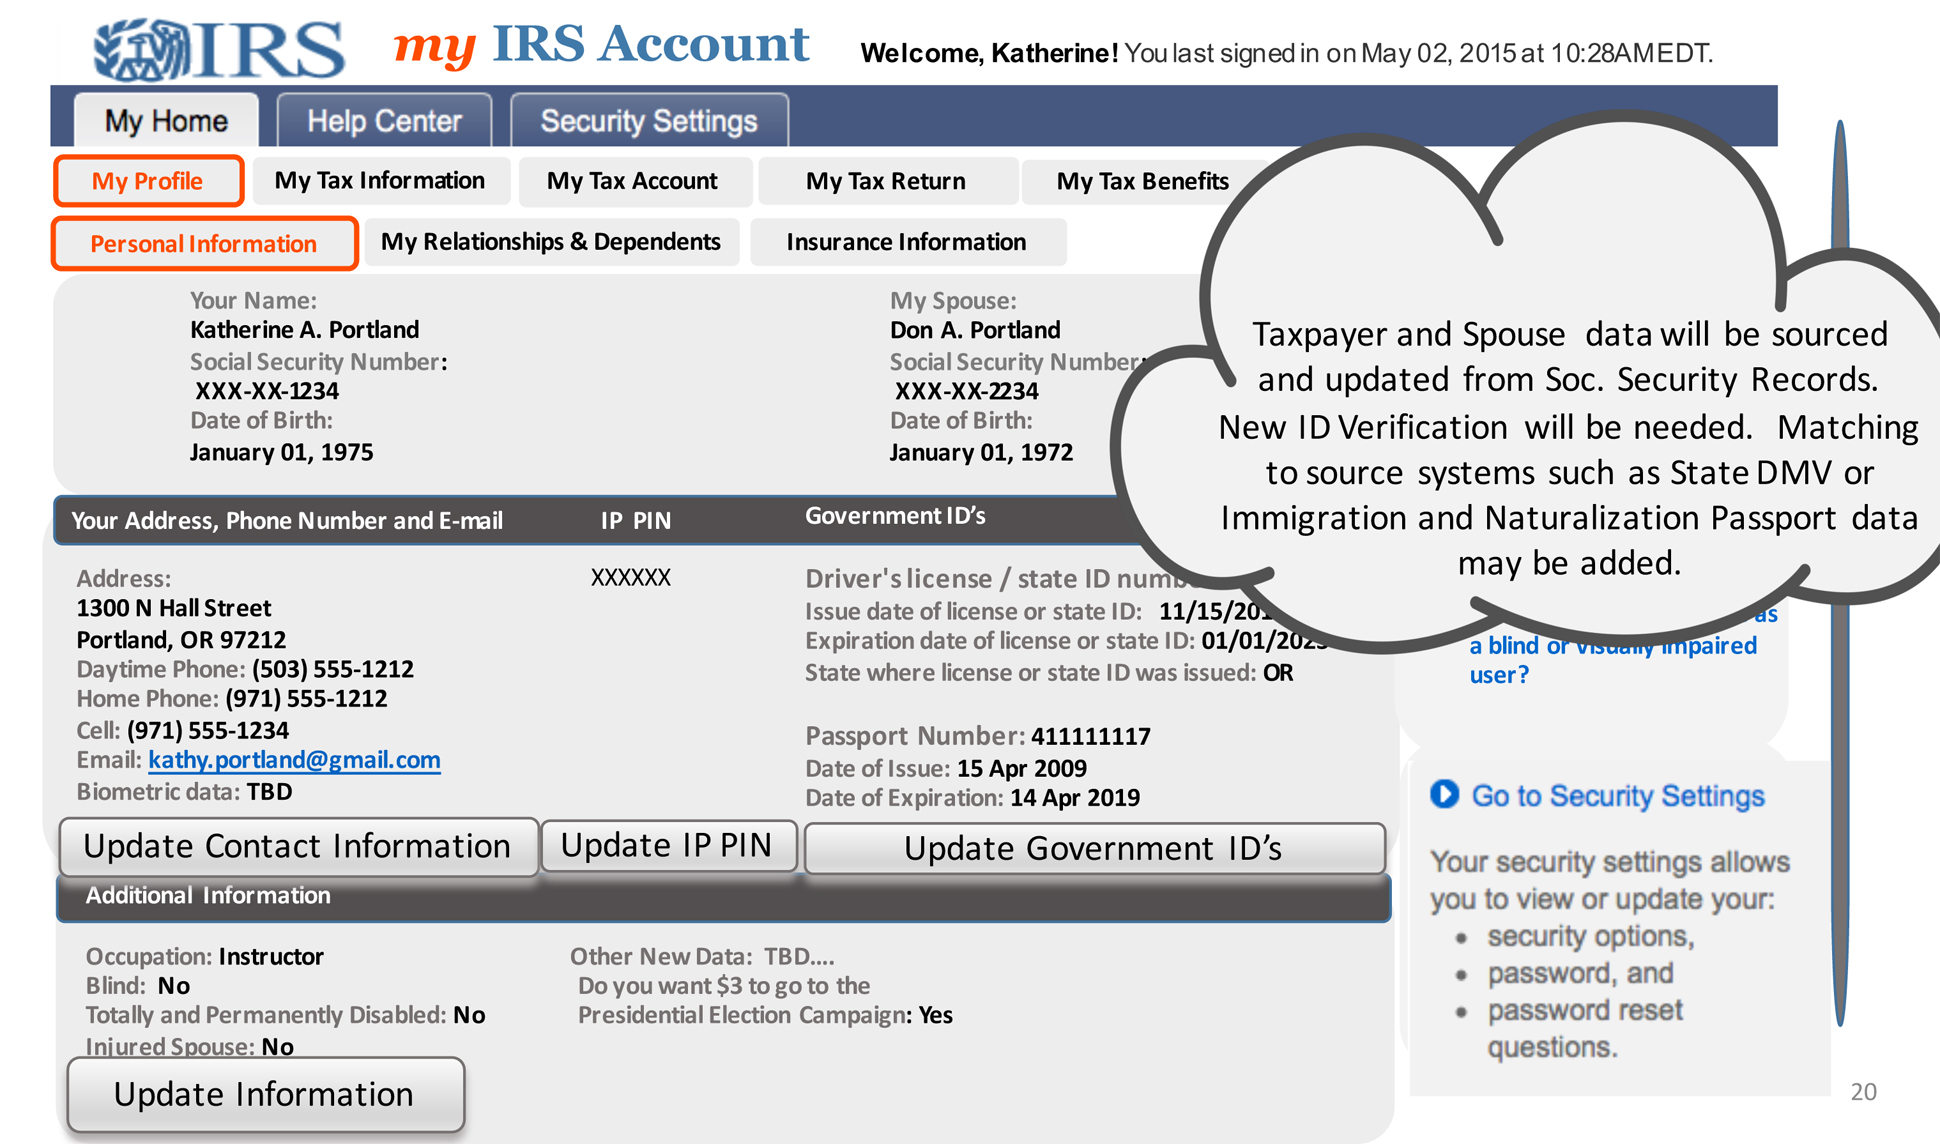 A page from a tax design challenge submission. Personal information on the profile page is shown.